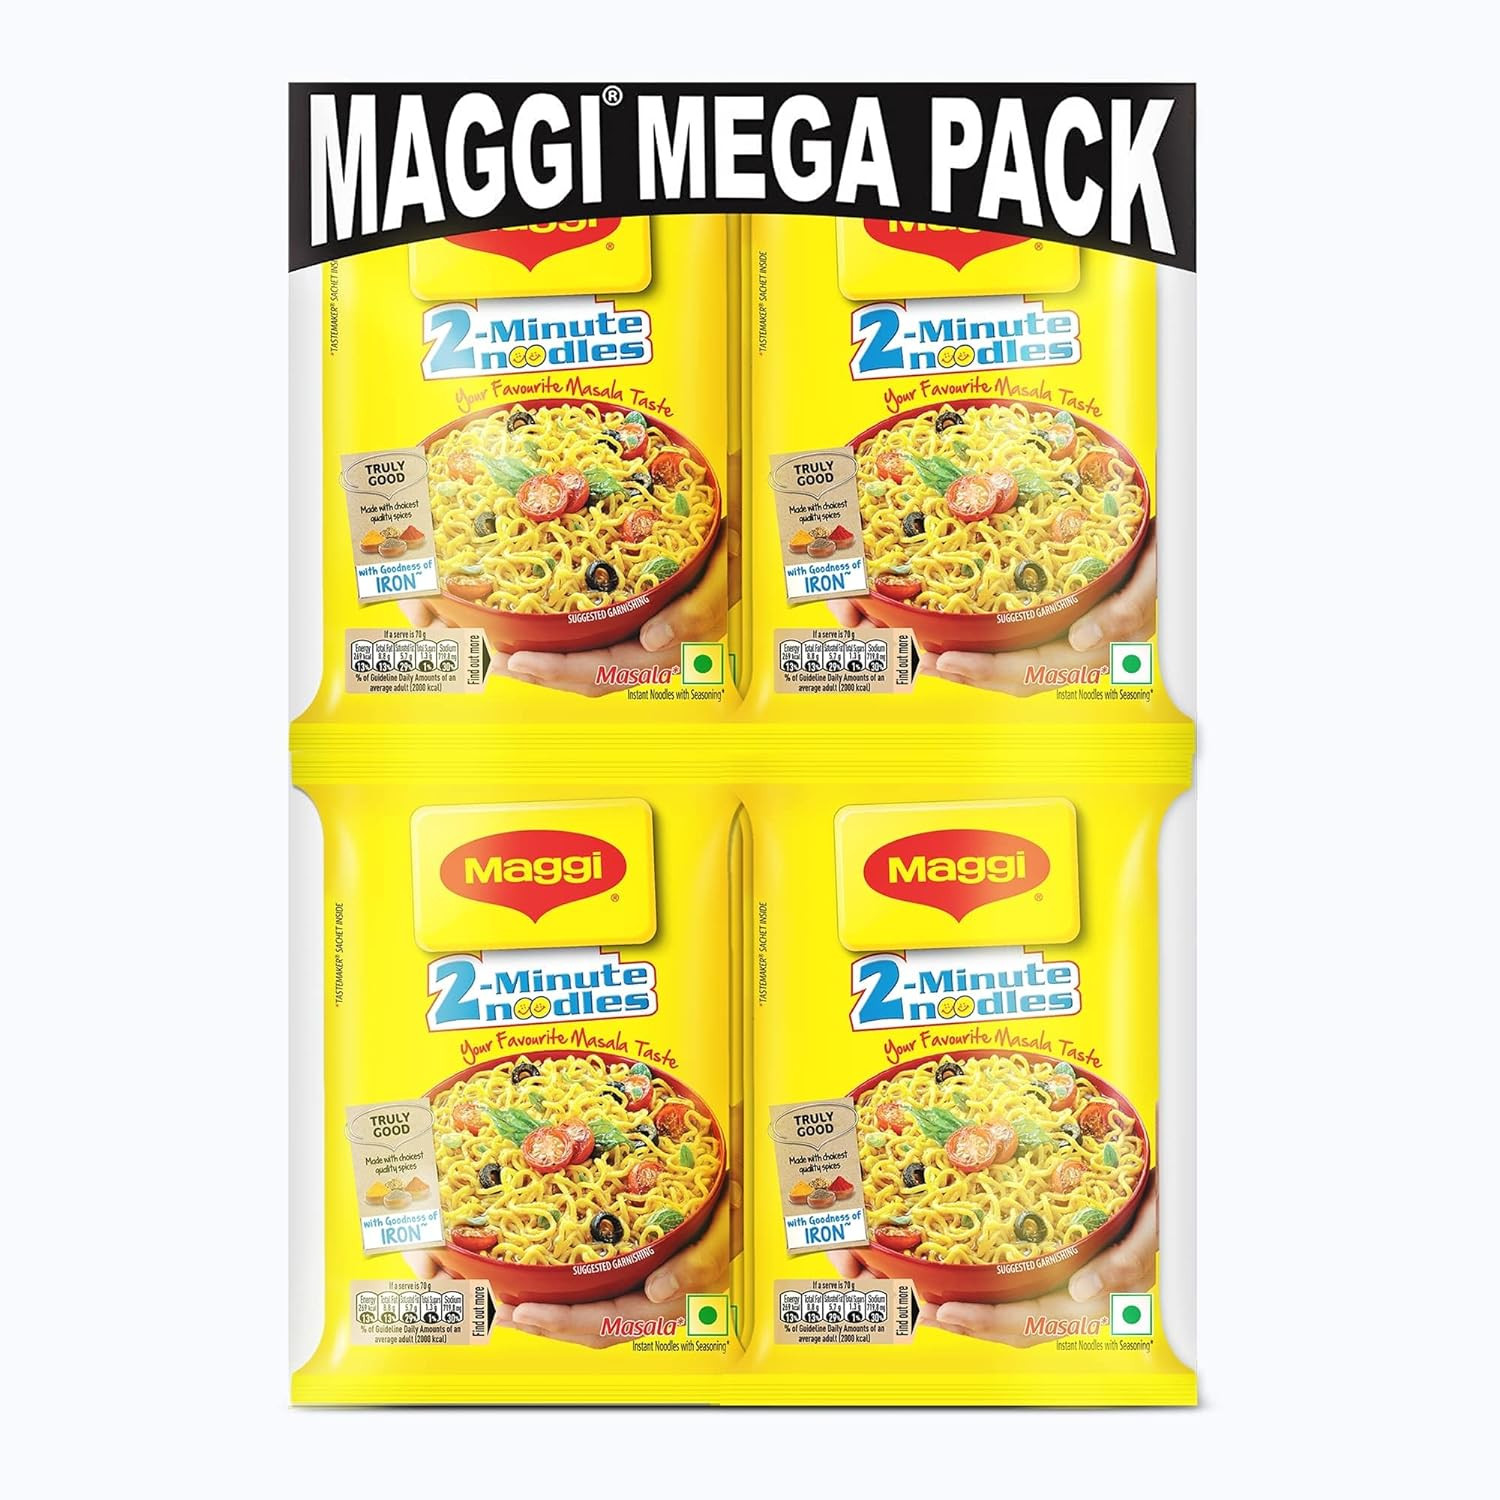 MAGGI 2-minute Instant Noodles, Masala Noodles with Goodness of Iron, Made with Choicest Quality Spices, Favourite Masala Taste, 70g ( Pack of 12 )